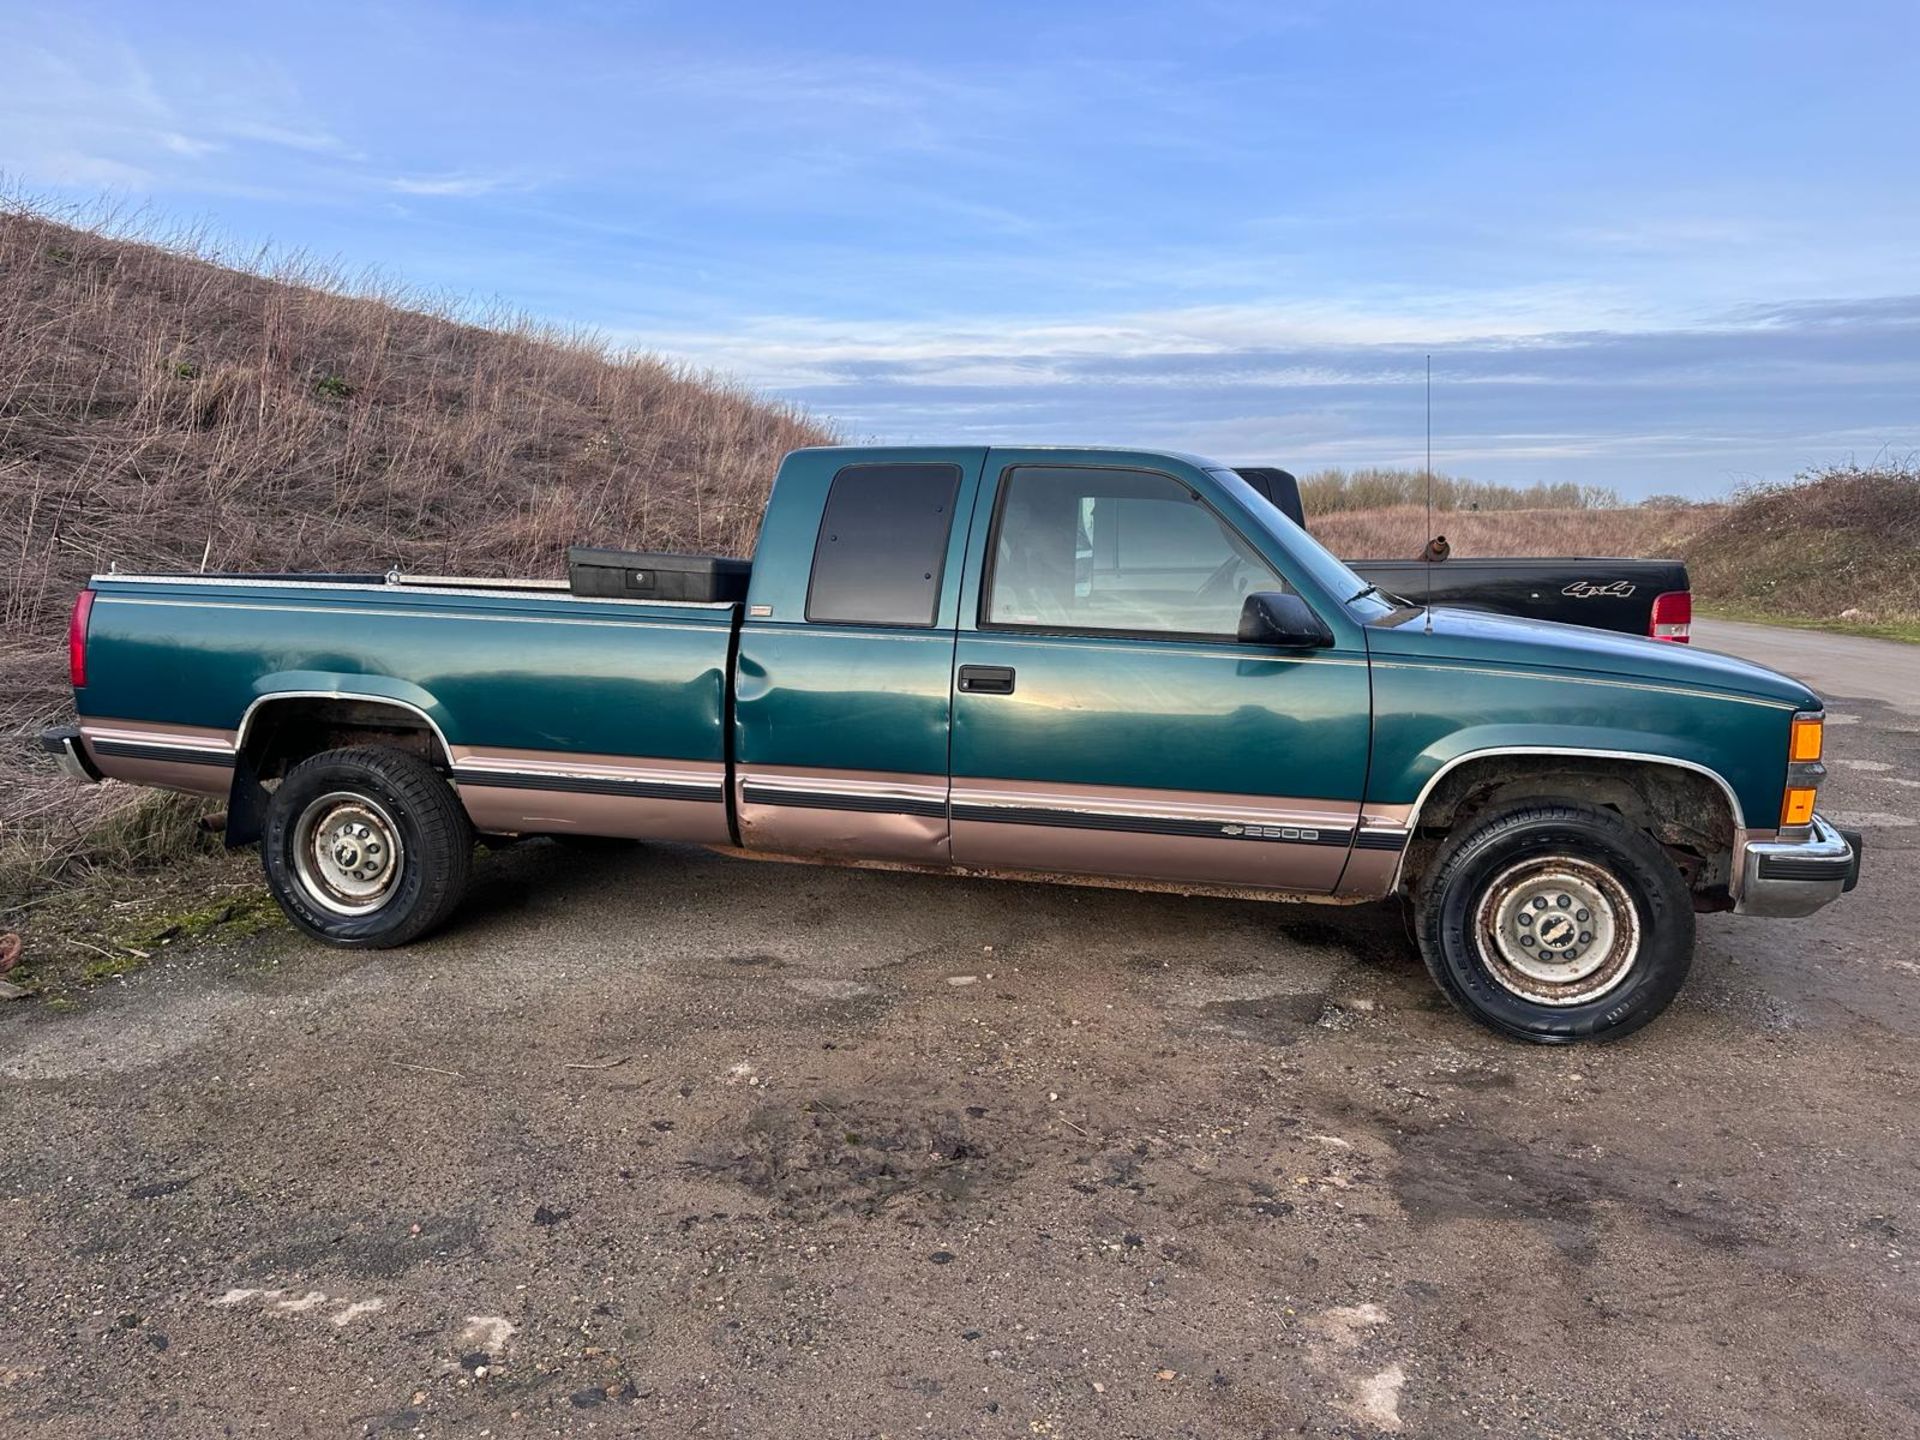 1995 CHEVROLET C2500 - 6.5 V8 TURBO DIESEL - AUTOMATIC GEARBOX - 129,646 MILES - Image 11 of 11